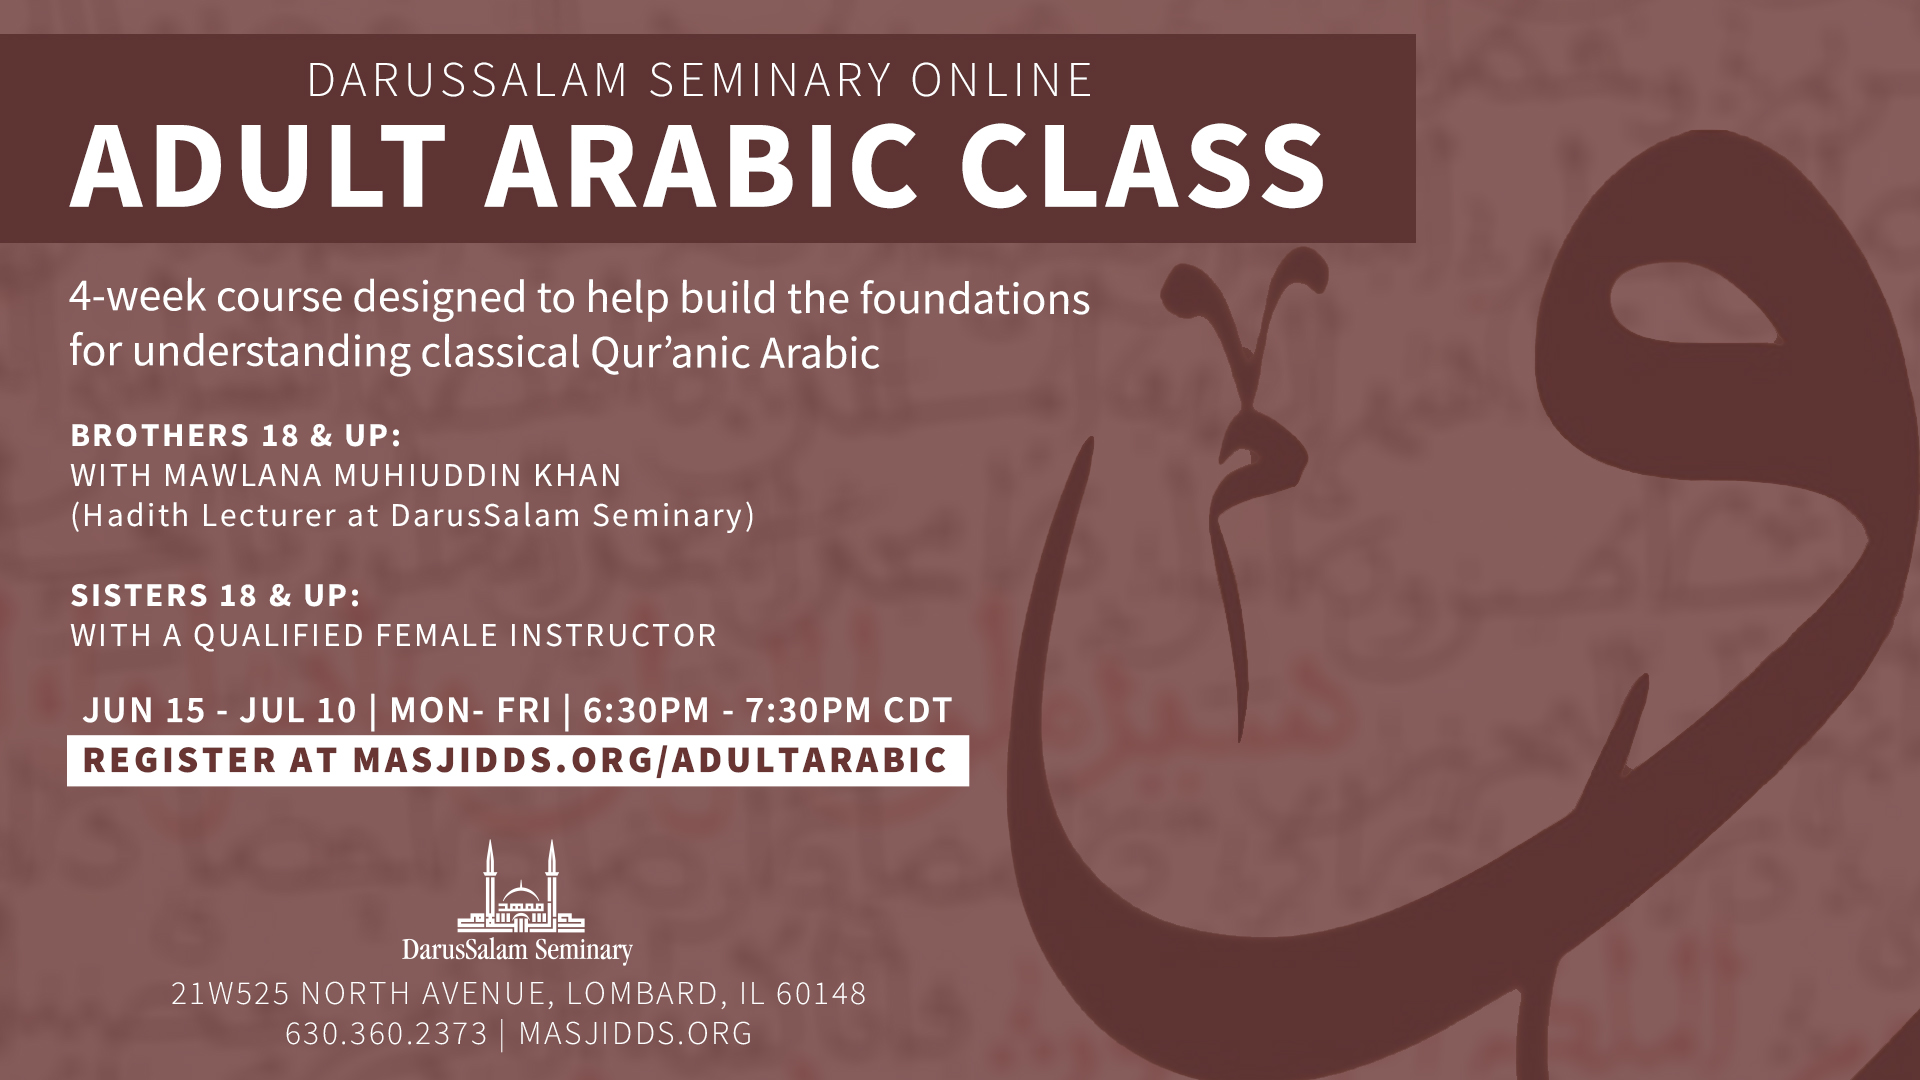 Online Arabic Classes For Adults